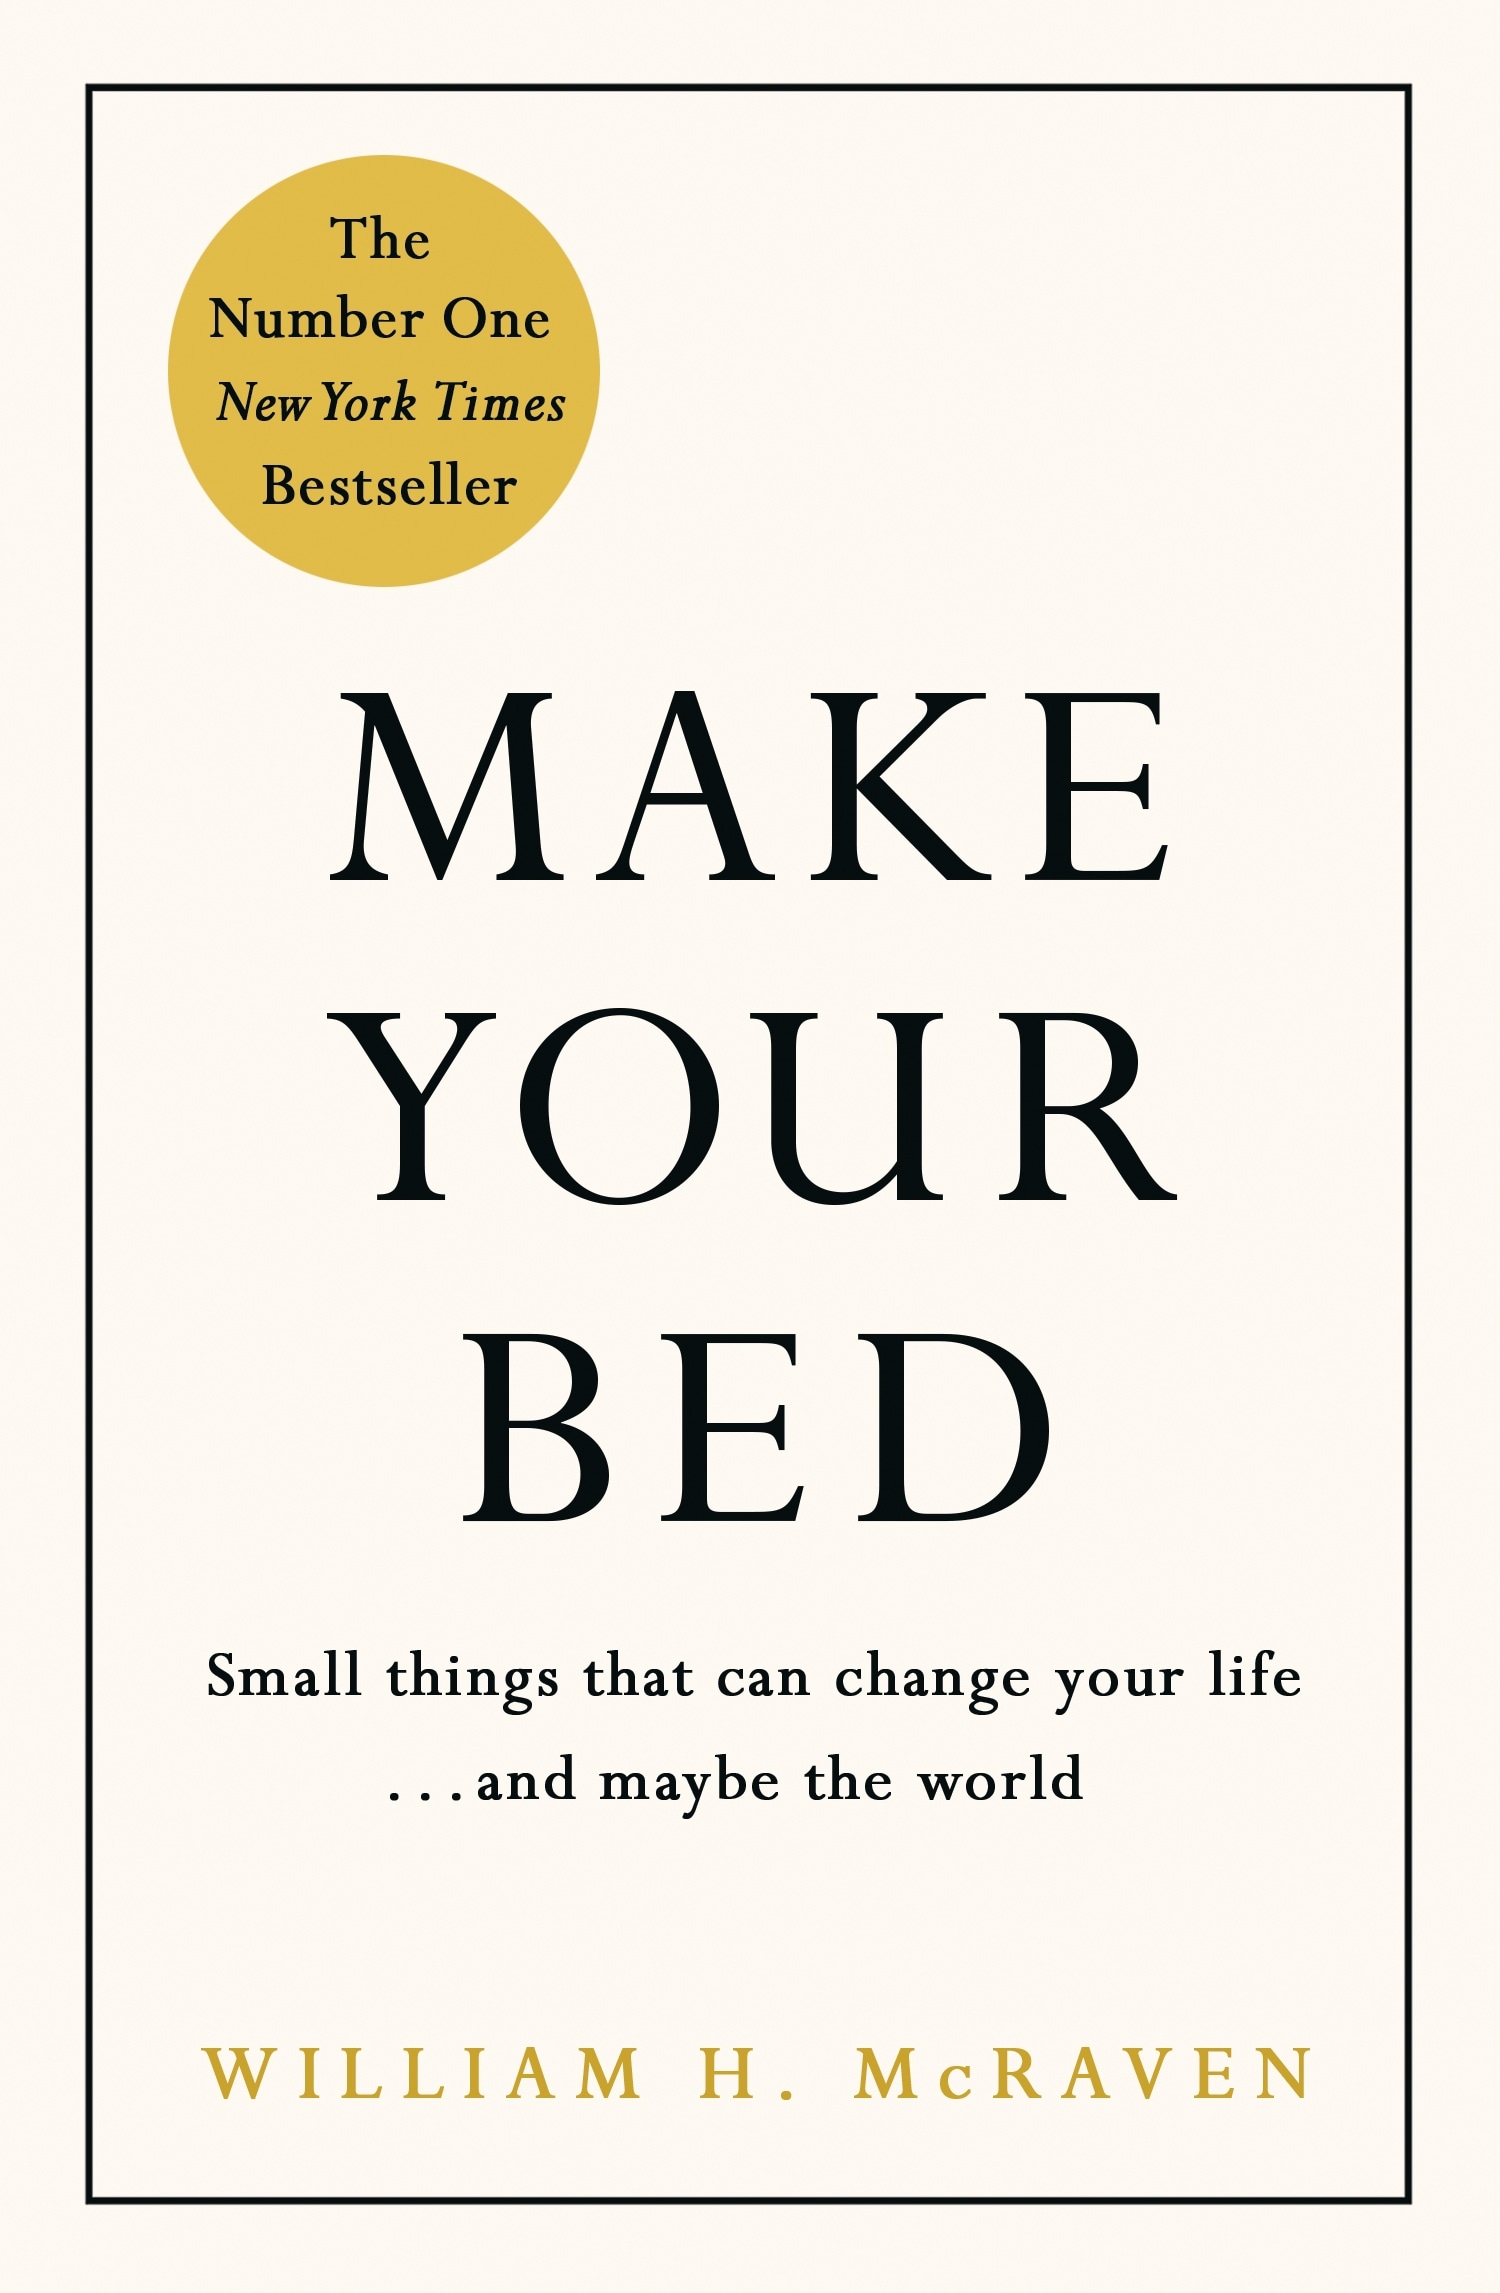 Book “Make Your Bed” by William H. McRaven — June 15, 2017